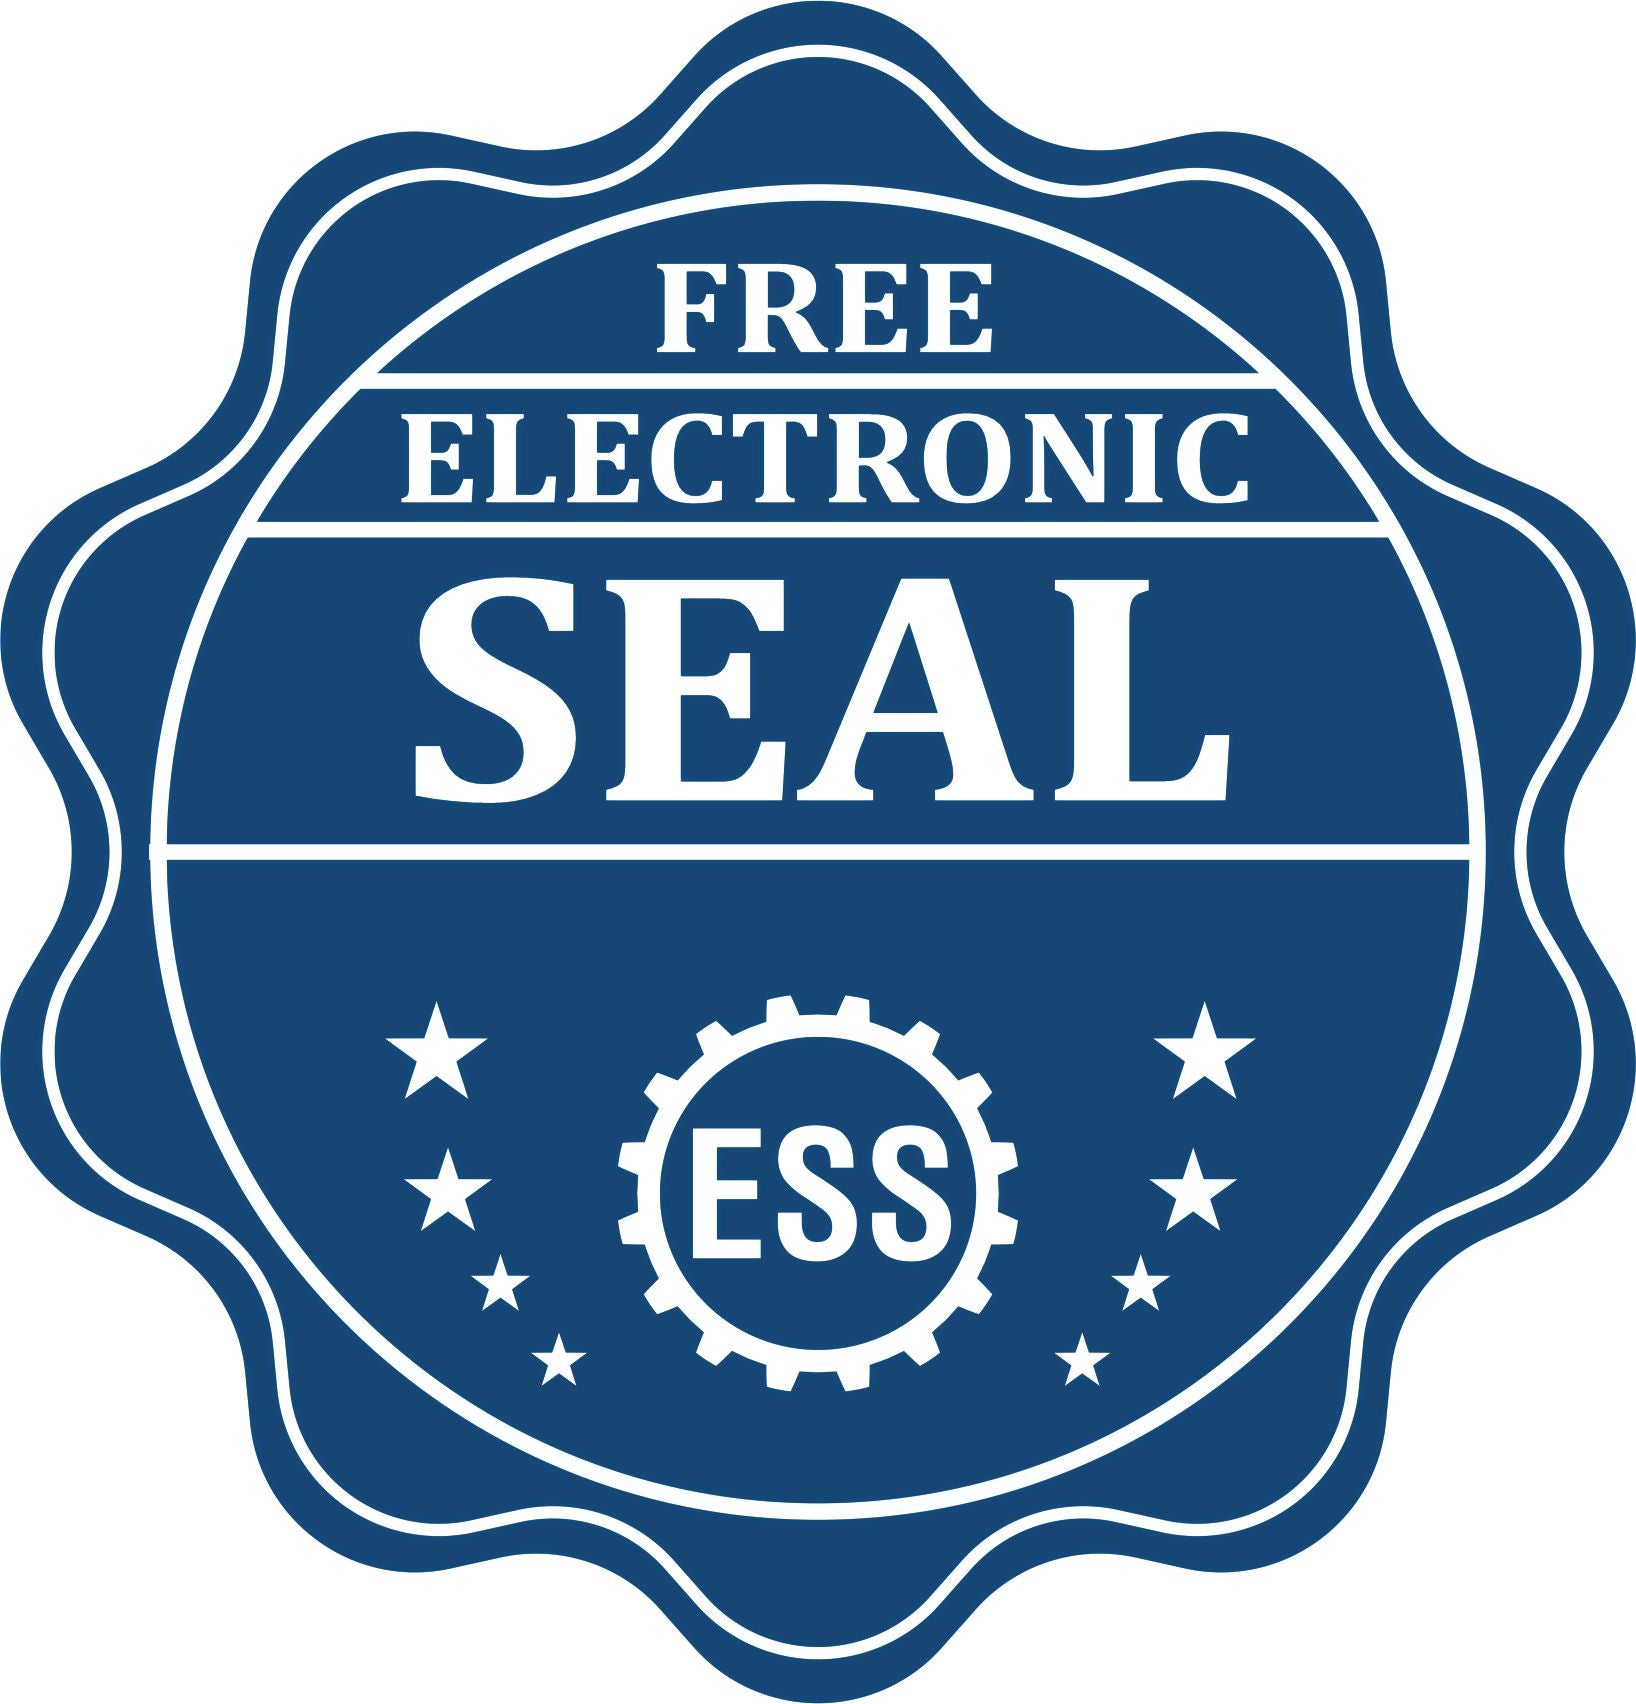 A badge showing a free electronic seal for the Extended Long Reach Vermont Architect Seal Embosser with stars and the ESS gear on the emblem.